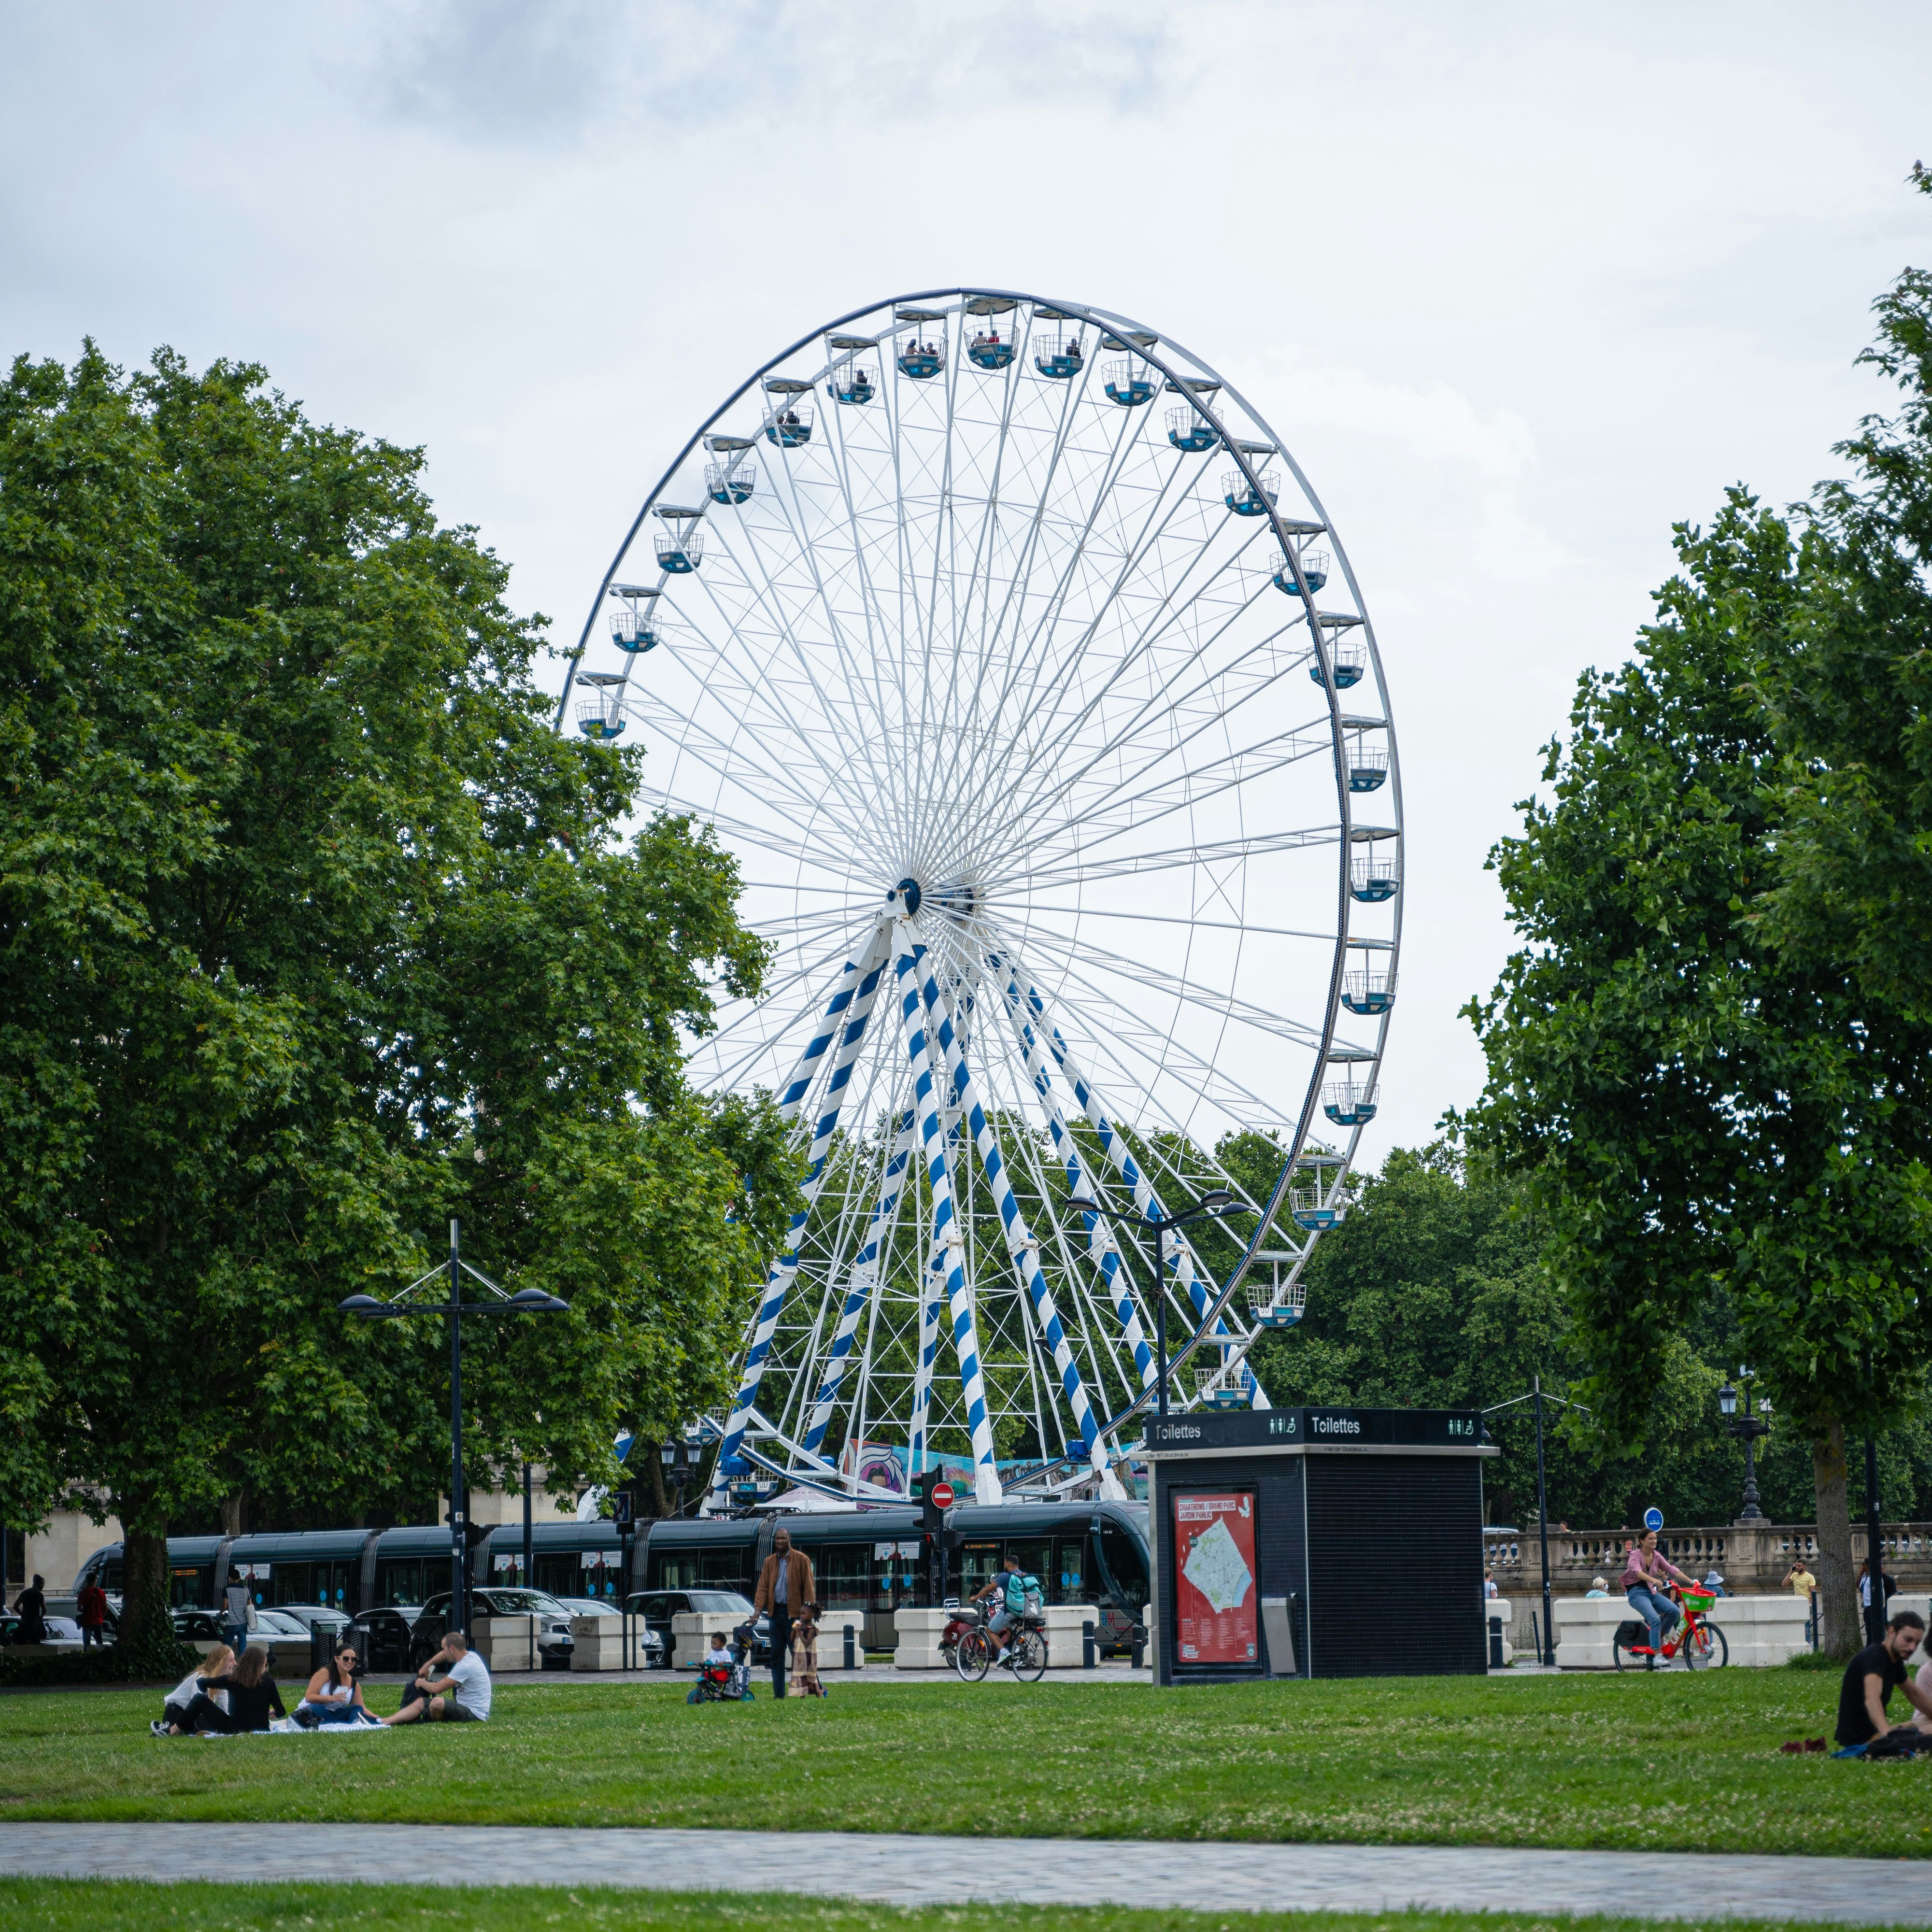 people walking on green grass field near white ferris wheel under white cloudy sky during daytime